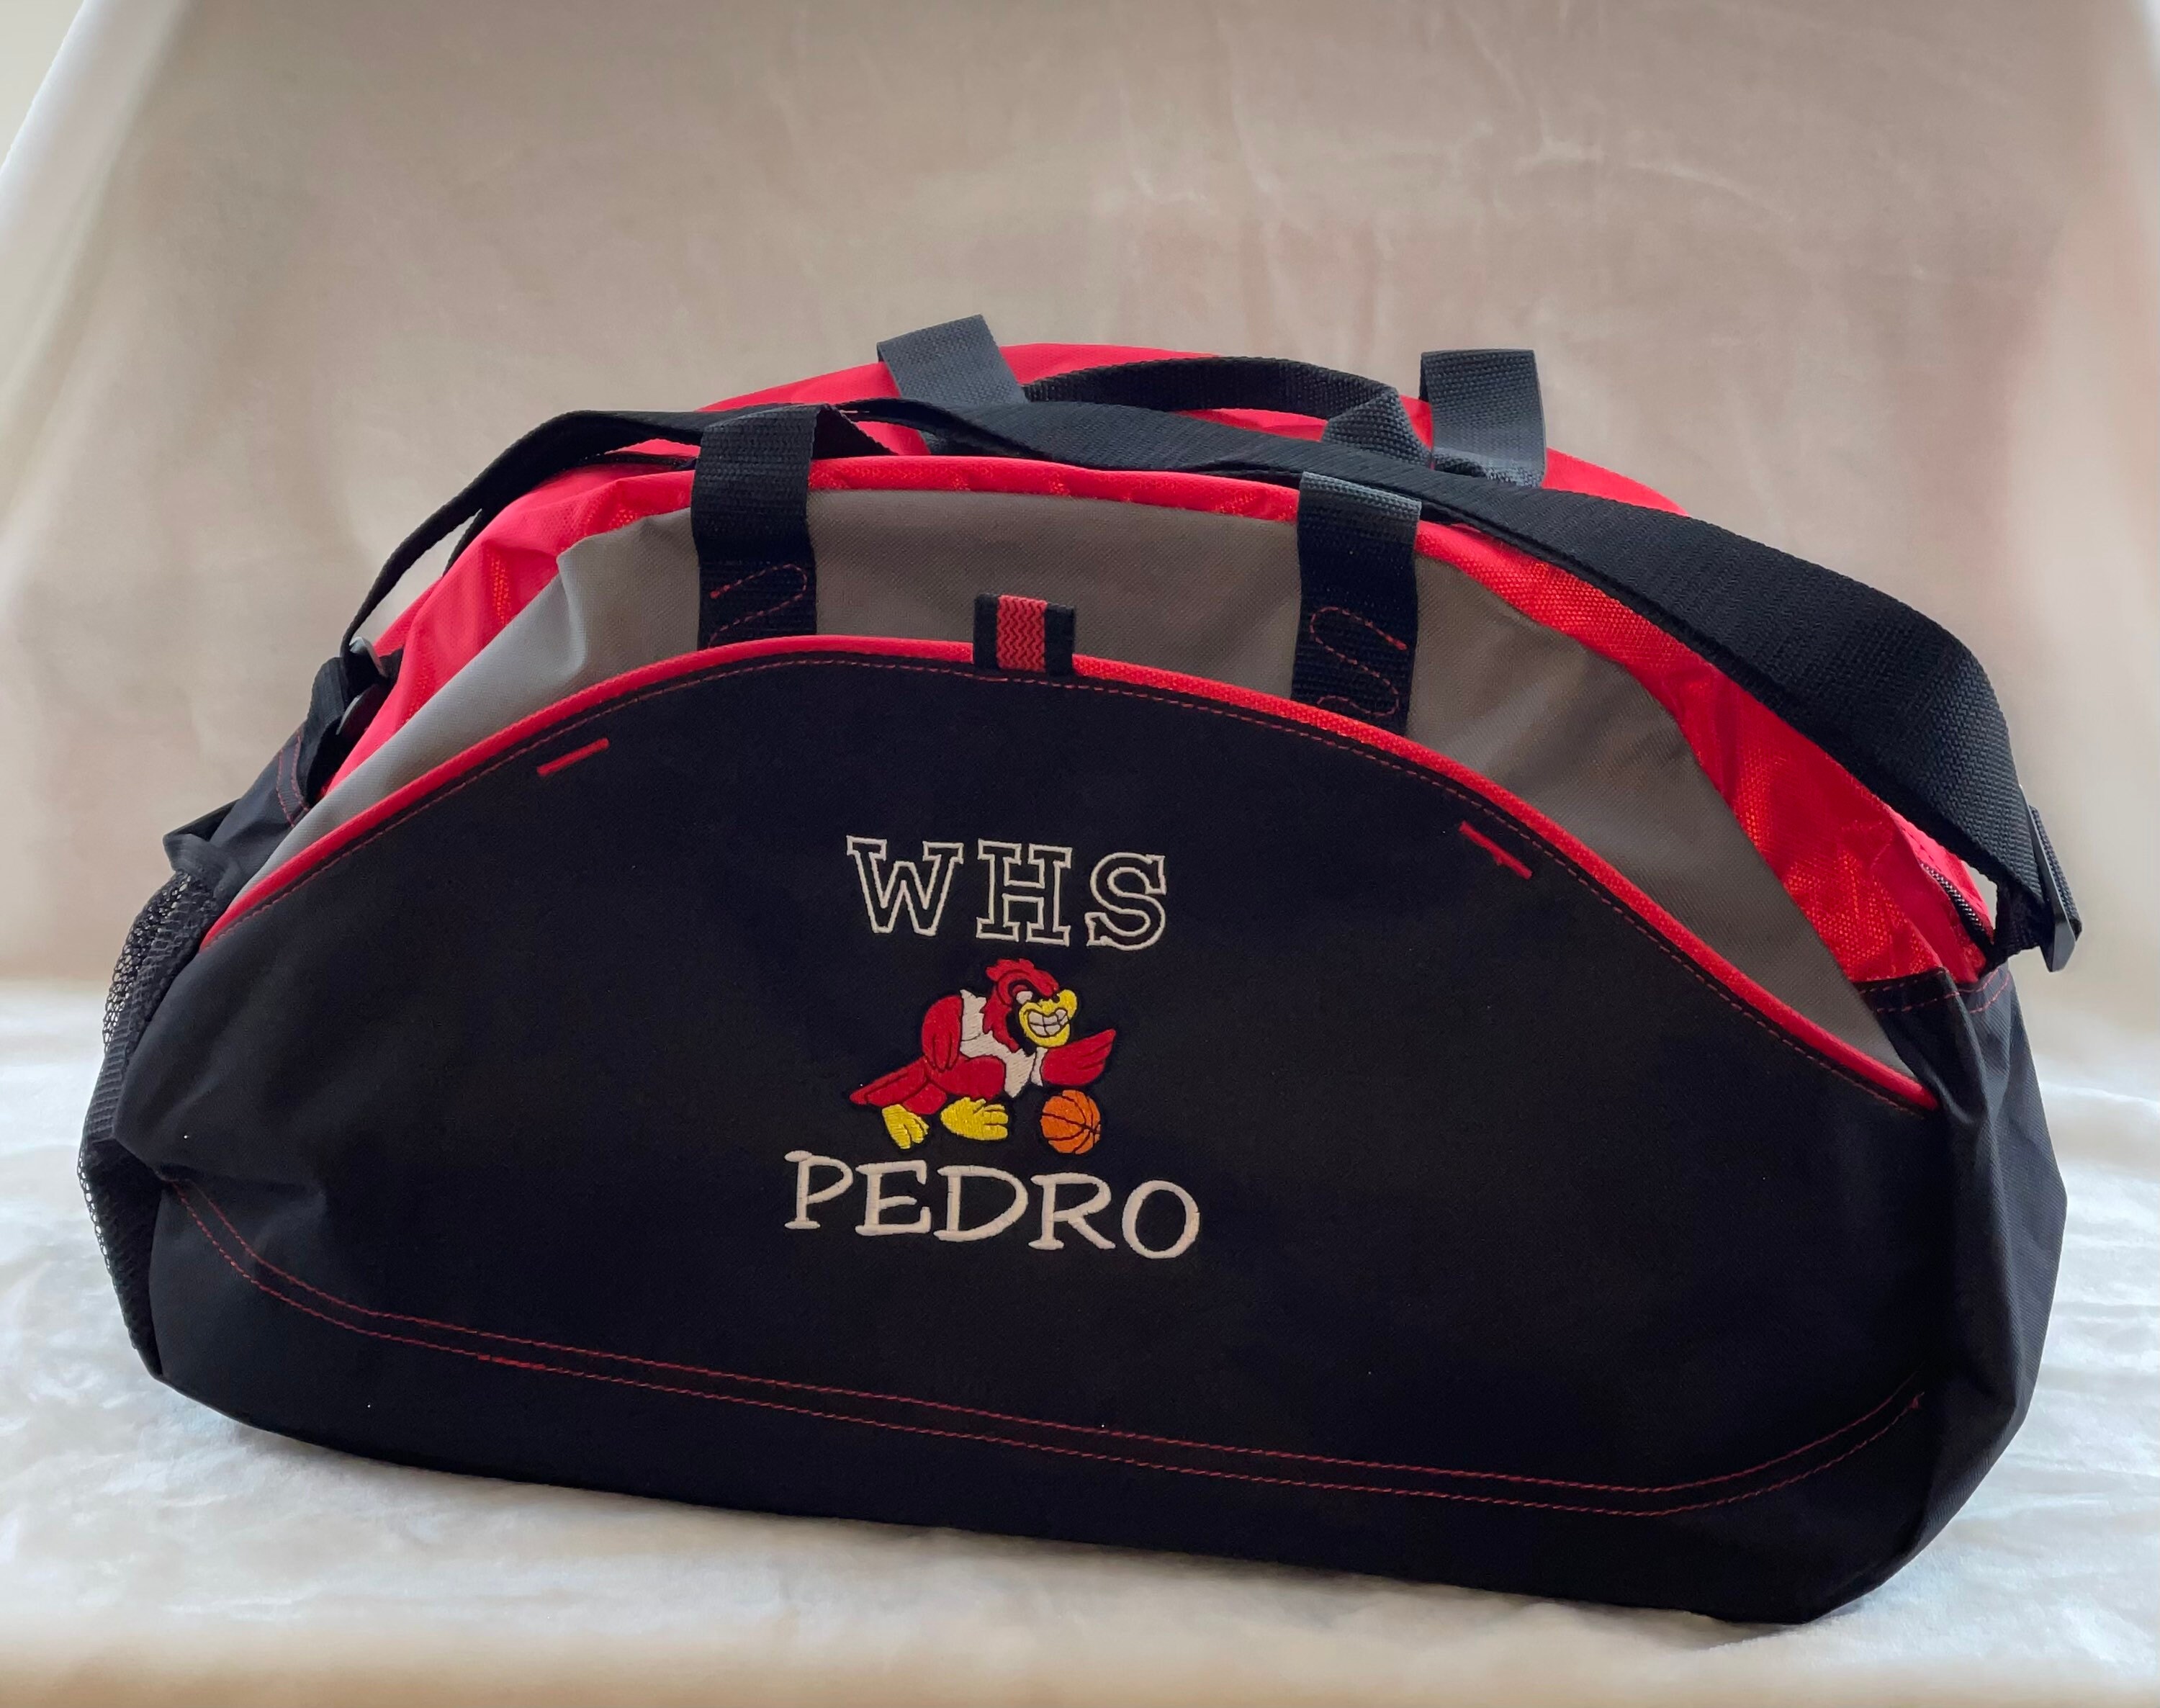 Personalized Canvas Duffle Bag Embroidered Duffel Bag Custom Order Duffle  Fitness Gym Bag Sport Camp Bag Weekender Bag Personalized Gift - Hippirhino  Purses Totes Custom Personalized Handmade Bags